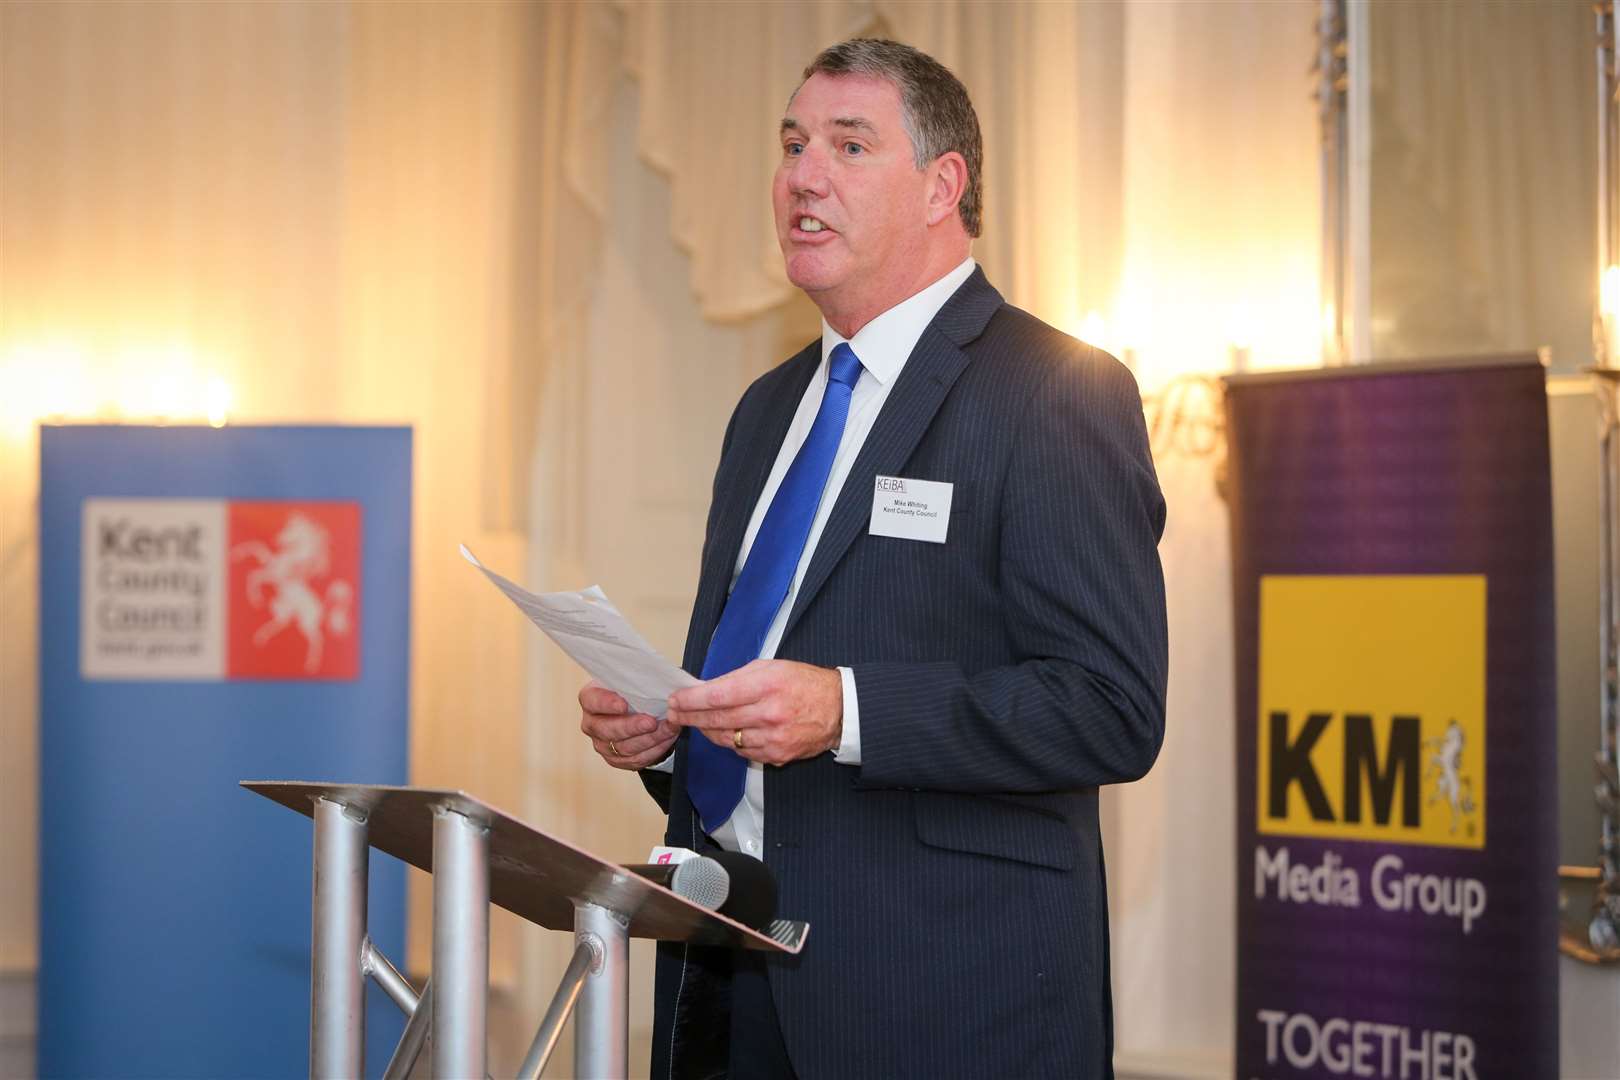 KCC's Mike Whiting says the decision to cancel this year's KEiBAs was understandable